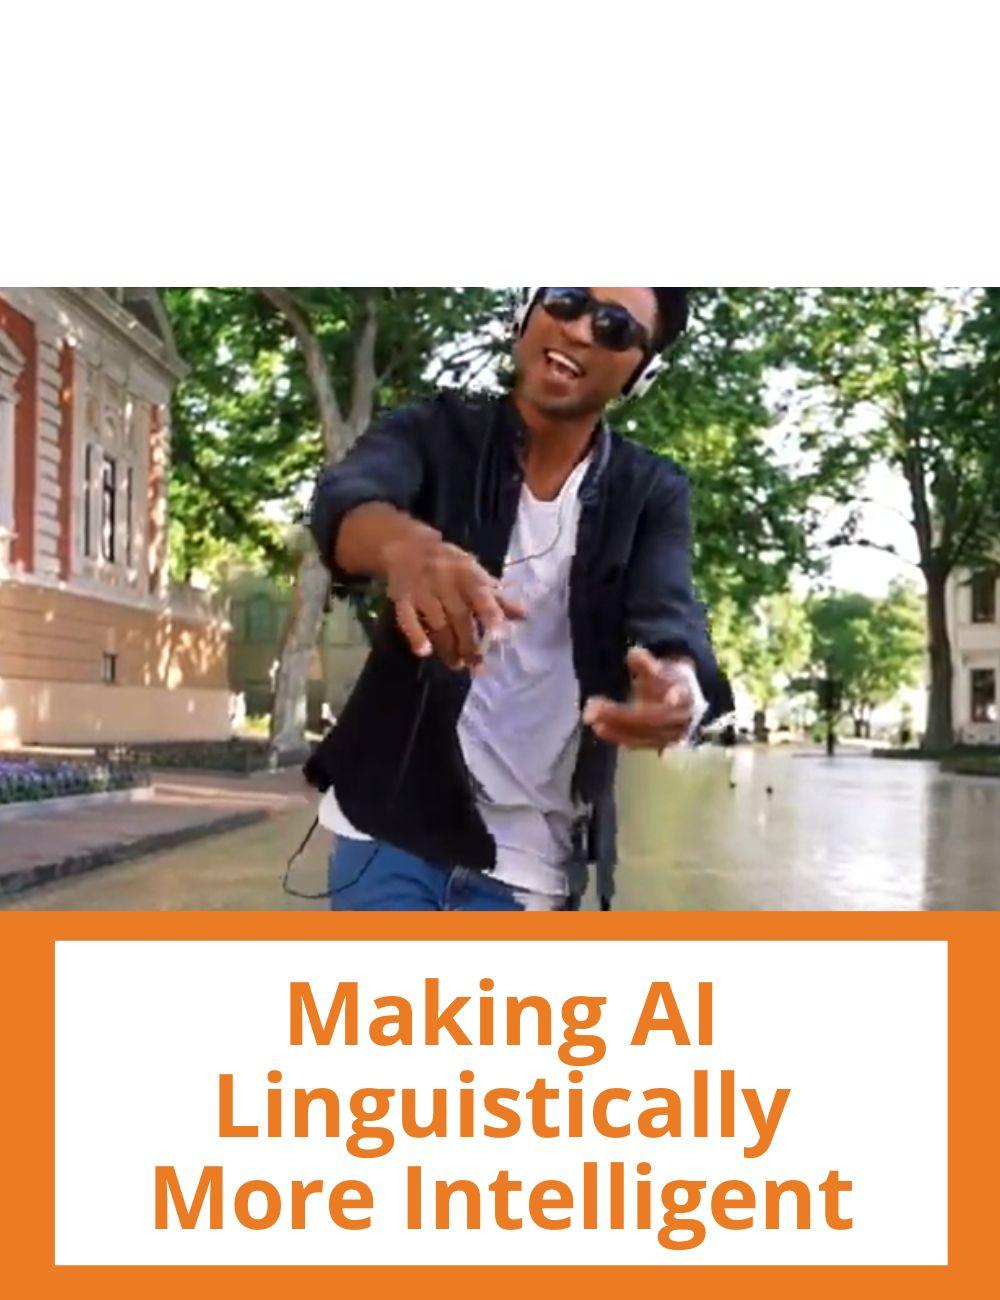 Link to related video. Image: a guy gesticulating. Story headline: Making AI Linguistically More Intelligent